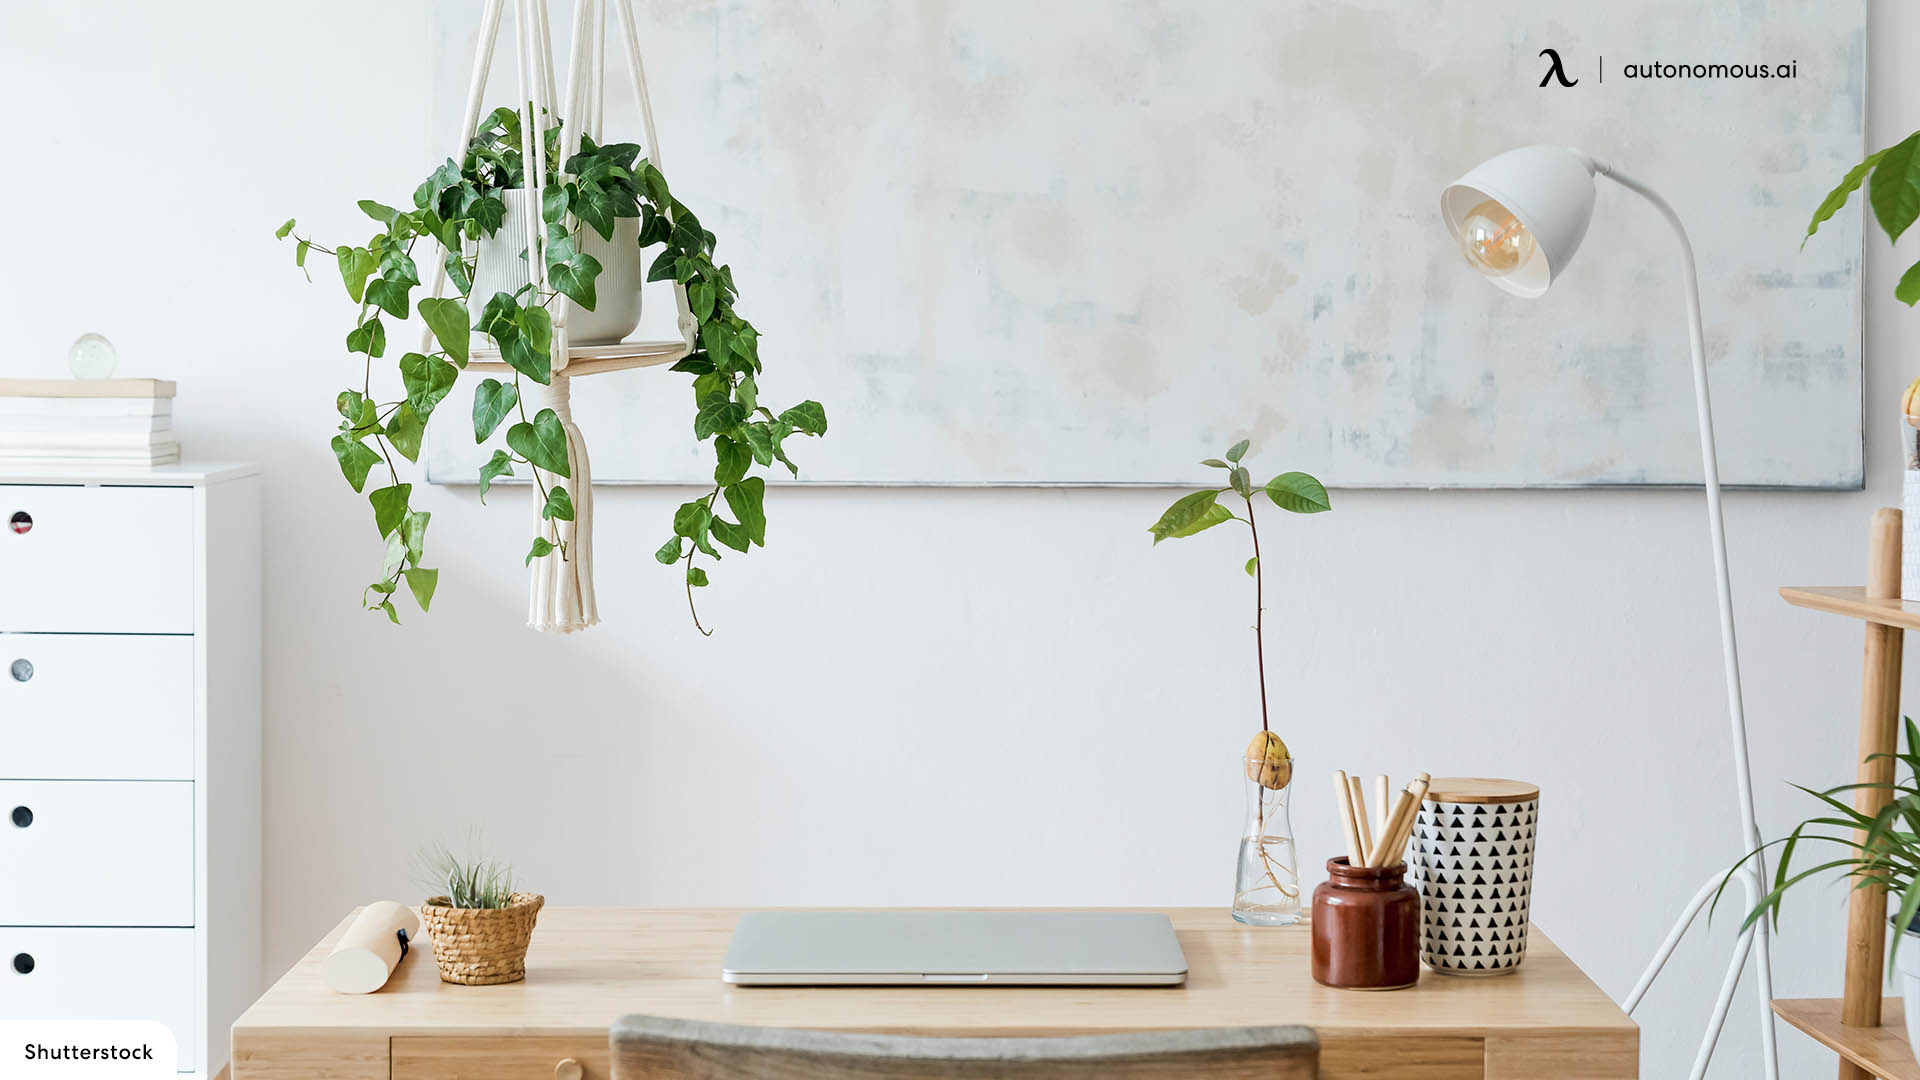 Bring nature to your workspace